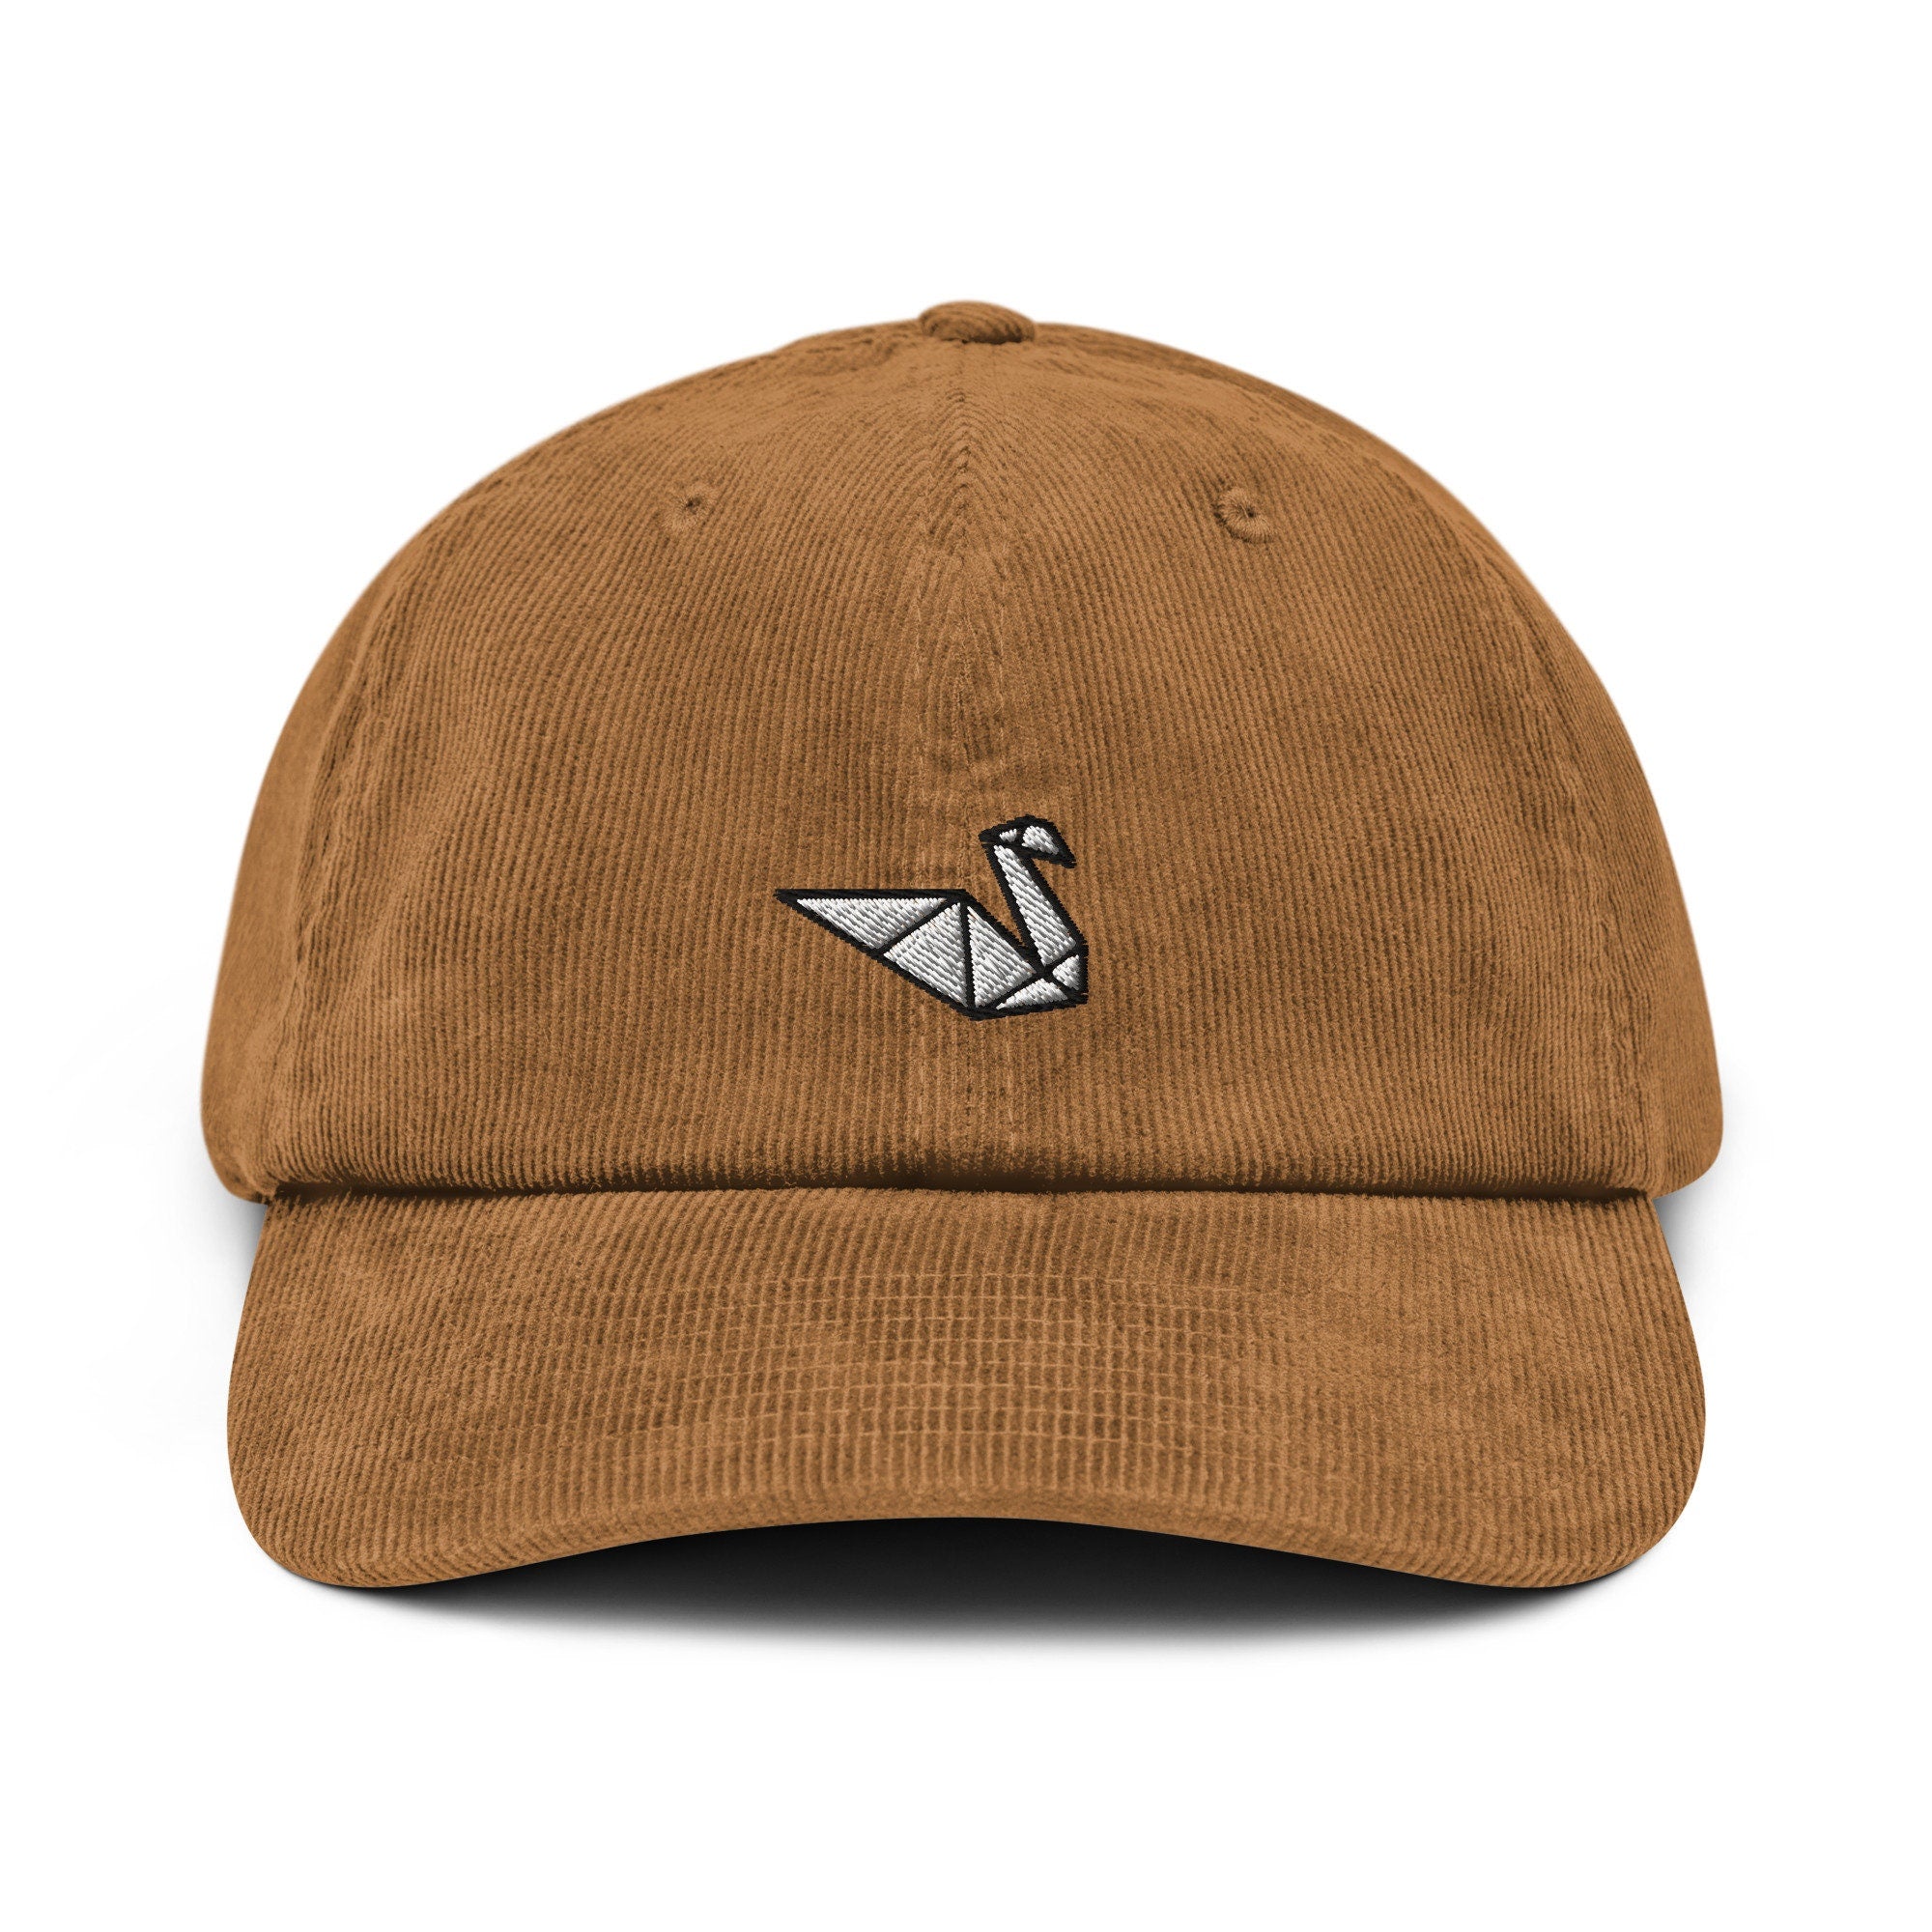 Paper Swan Corduroy Hat, Handmade Embroidered Corduroy Dad Cap - Multiple Colors